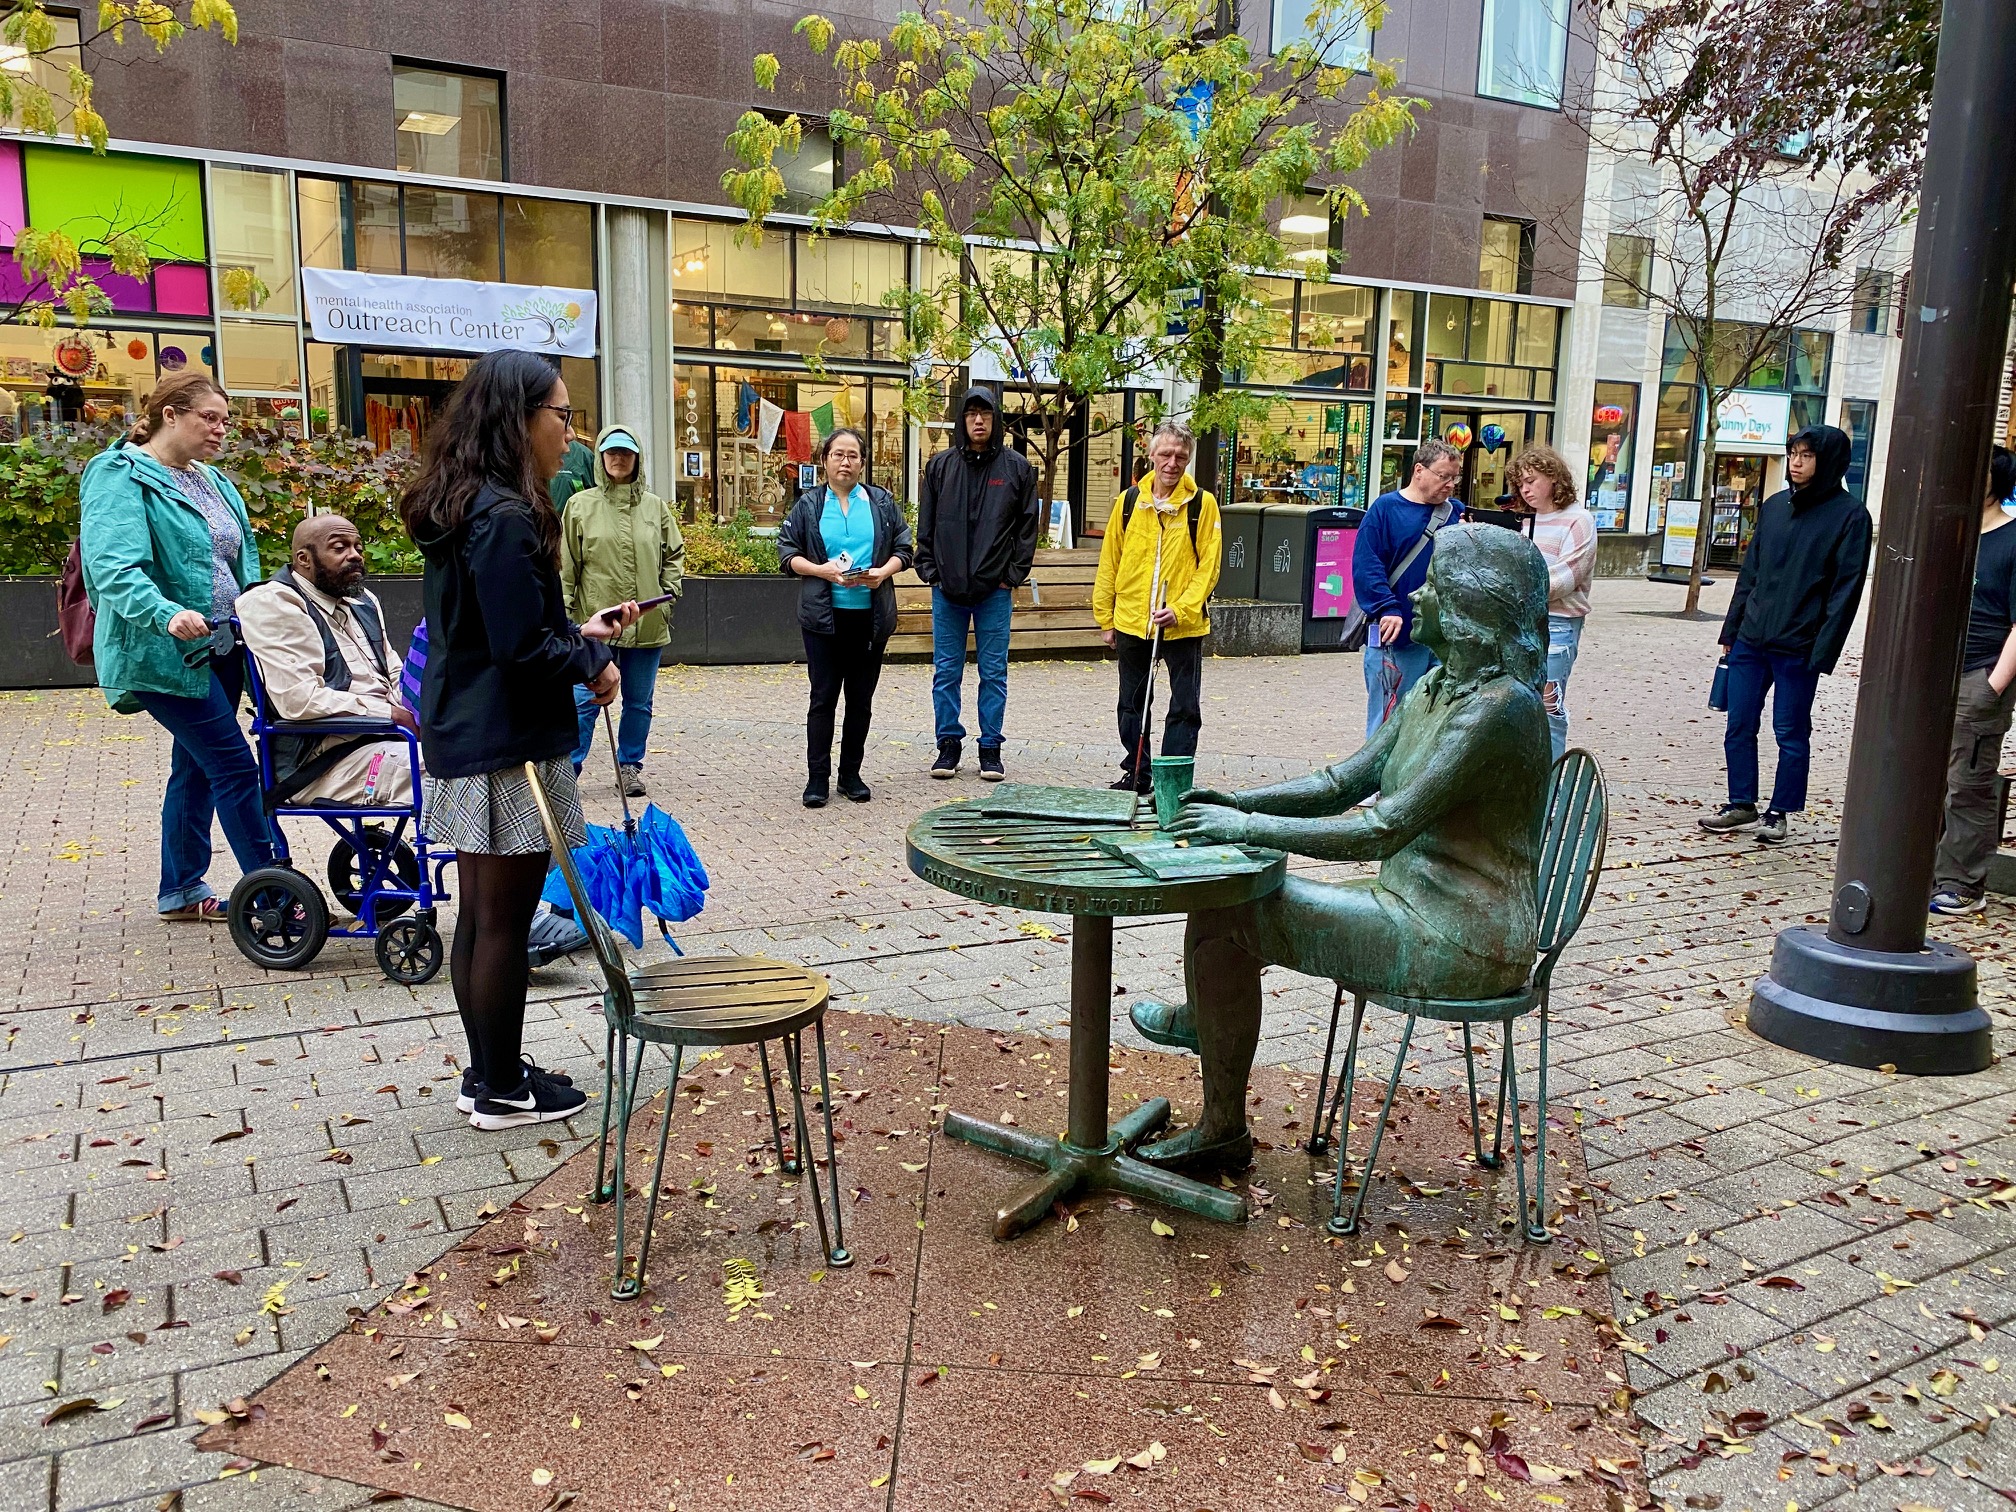 Ten mural tour attendees are gathered in a circle around the 'Child of Ithaca' sculpture. The group is facing the camera and the back of the sculpture is shown. The sculpture is a life-size bronze sculpture of a young woman with shoulder-length hair sitting at a table, with a coffee cup in her right hand and an open book before her. There is another chair opposite from the woman. The sculpture has a green patina over its entire surface; only the seat across from the woman retains its bronze color. One attendee is a wheelchair user and one holds a white cane. Lucy stands by the empty chair in the sculpture, holding an umbrella and reading out a description from her phone.